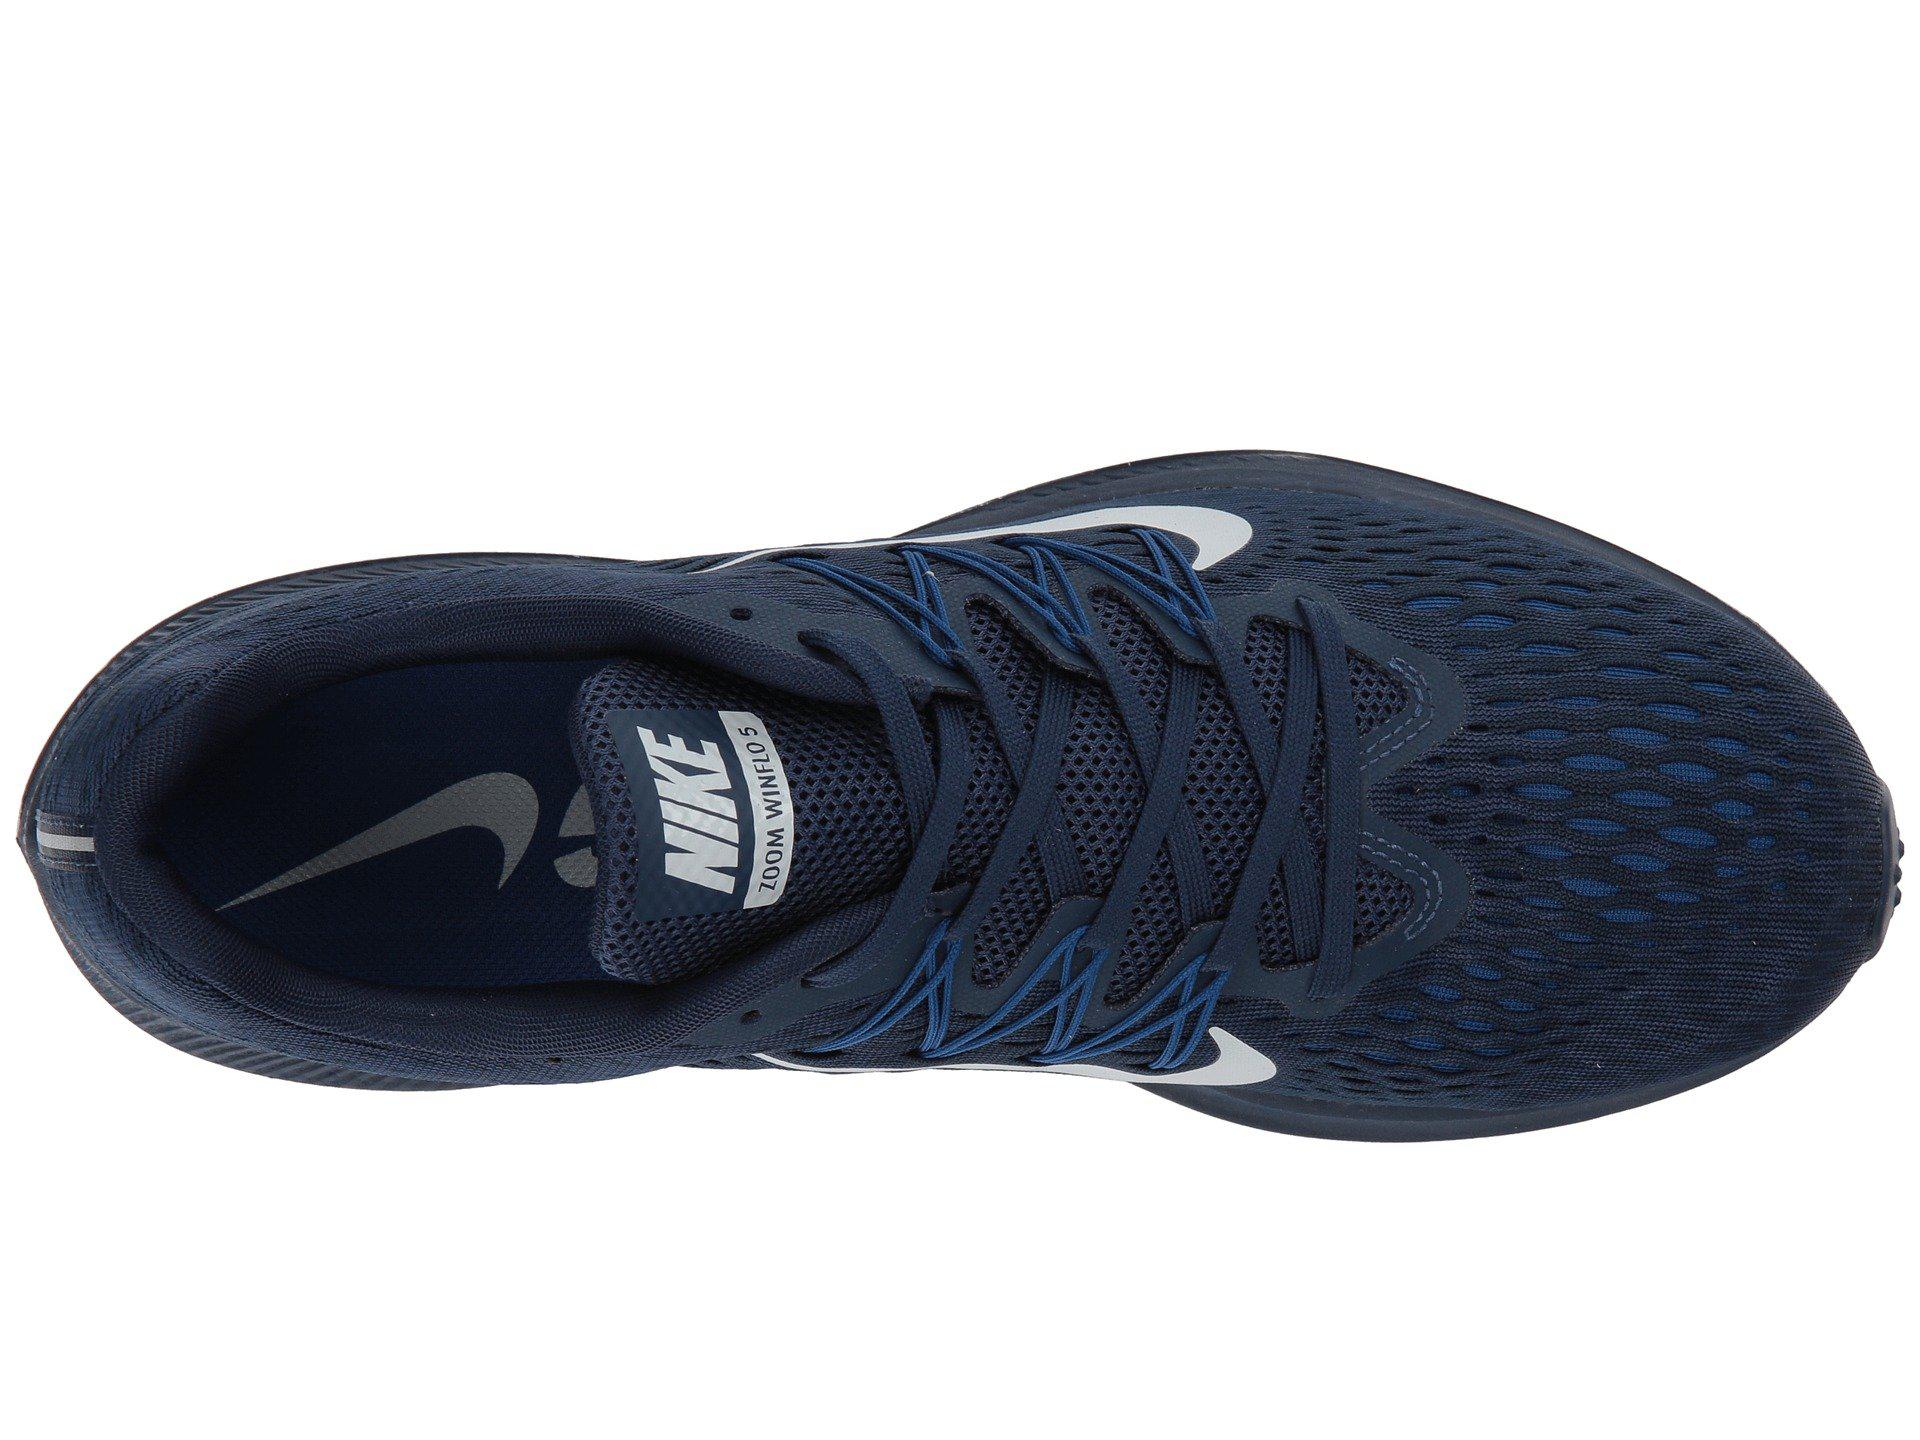 Nike Rubber Air Zoom Winflo 5 (midnight Navy/pure Platinum) Running Shoes  in Blue for Men - Lyst